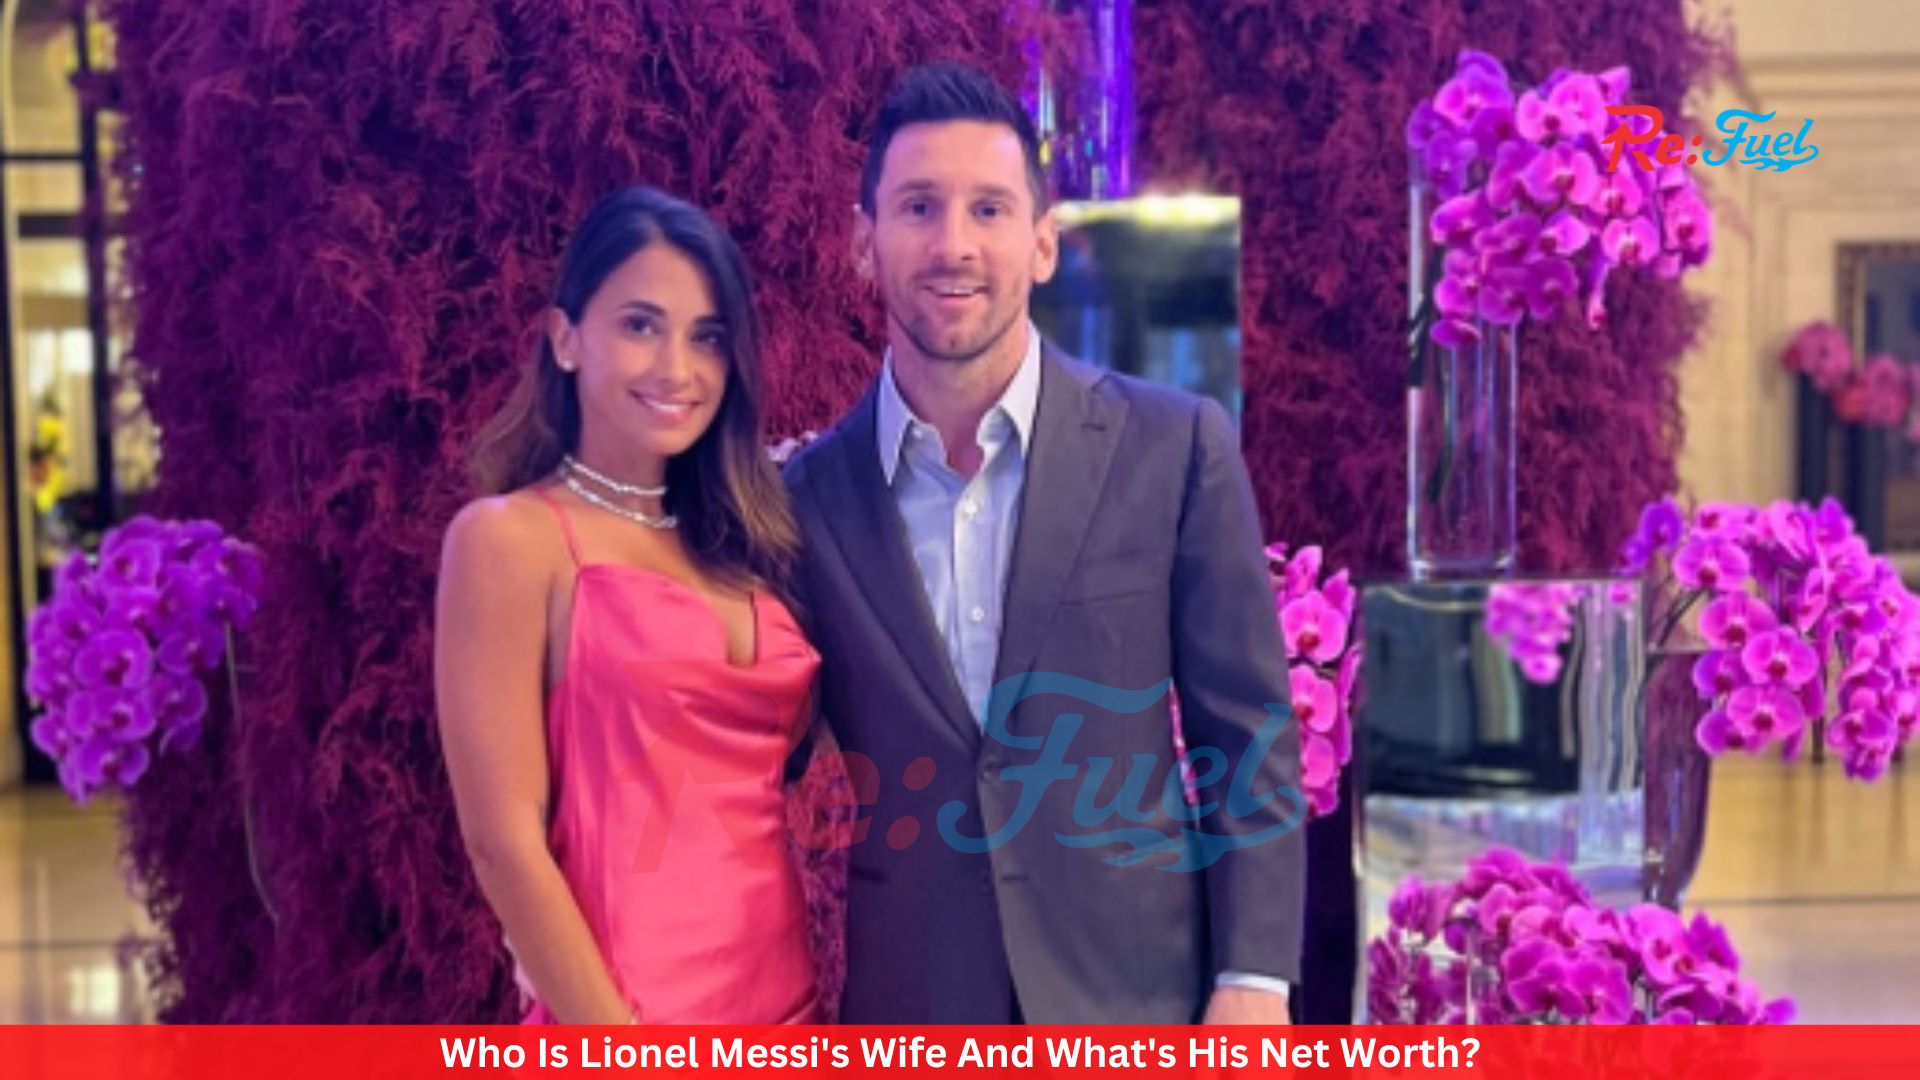 Who Is Lionel Messi's Wife And What's His Net Worth?